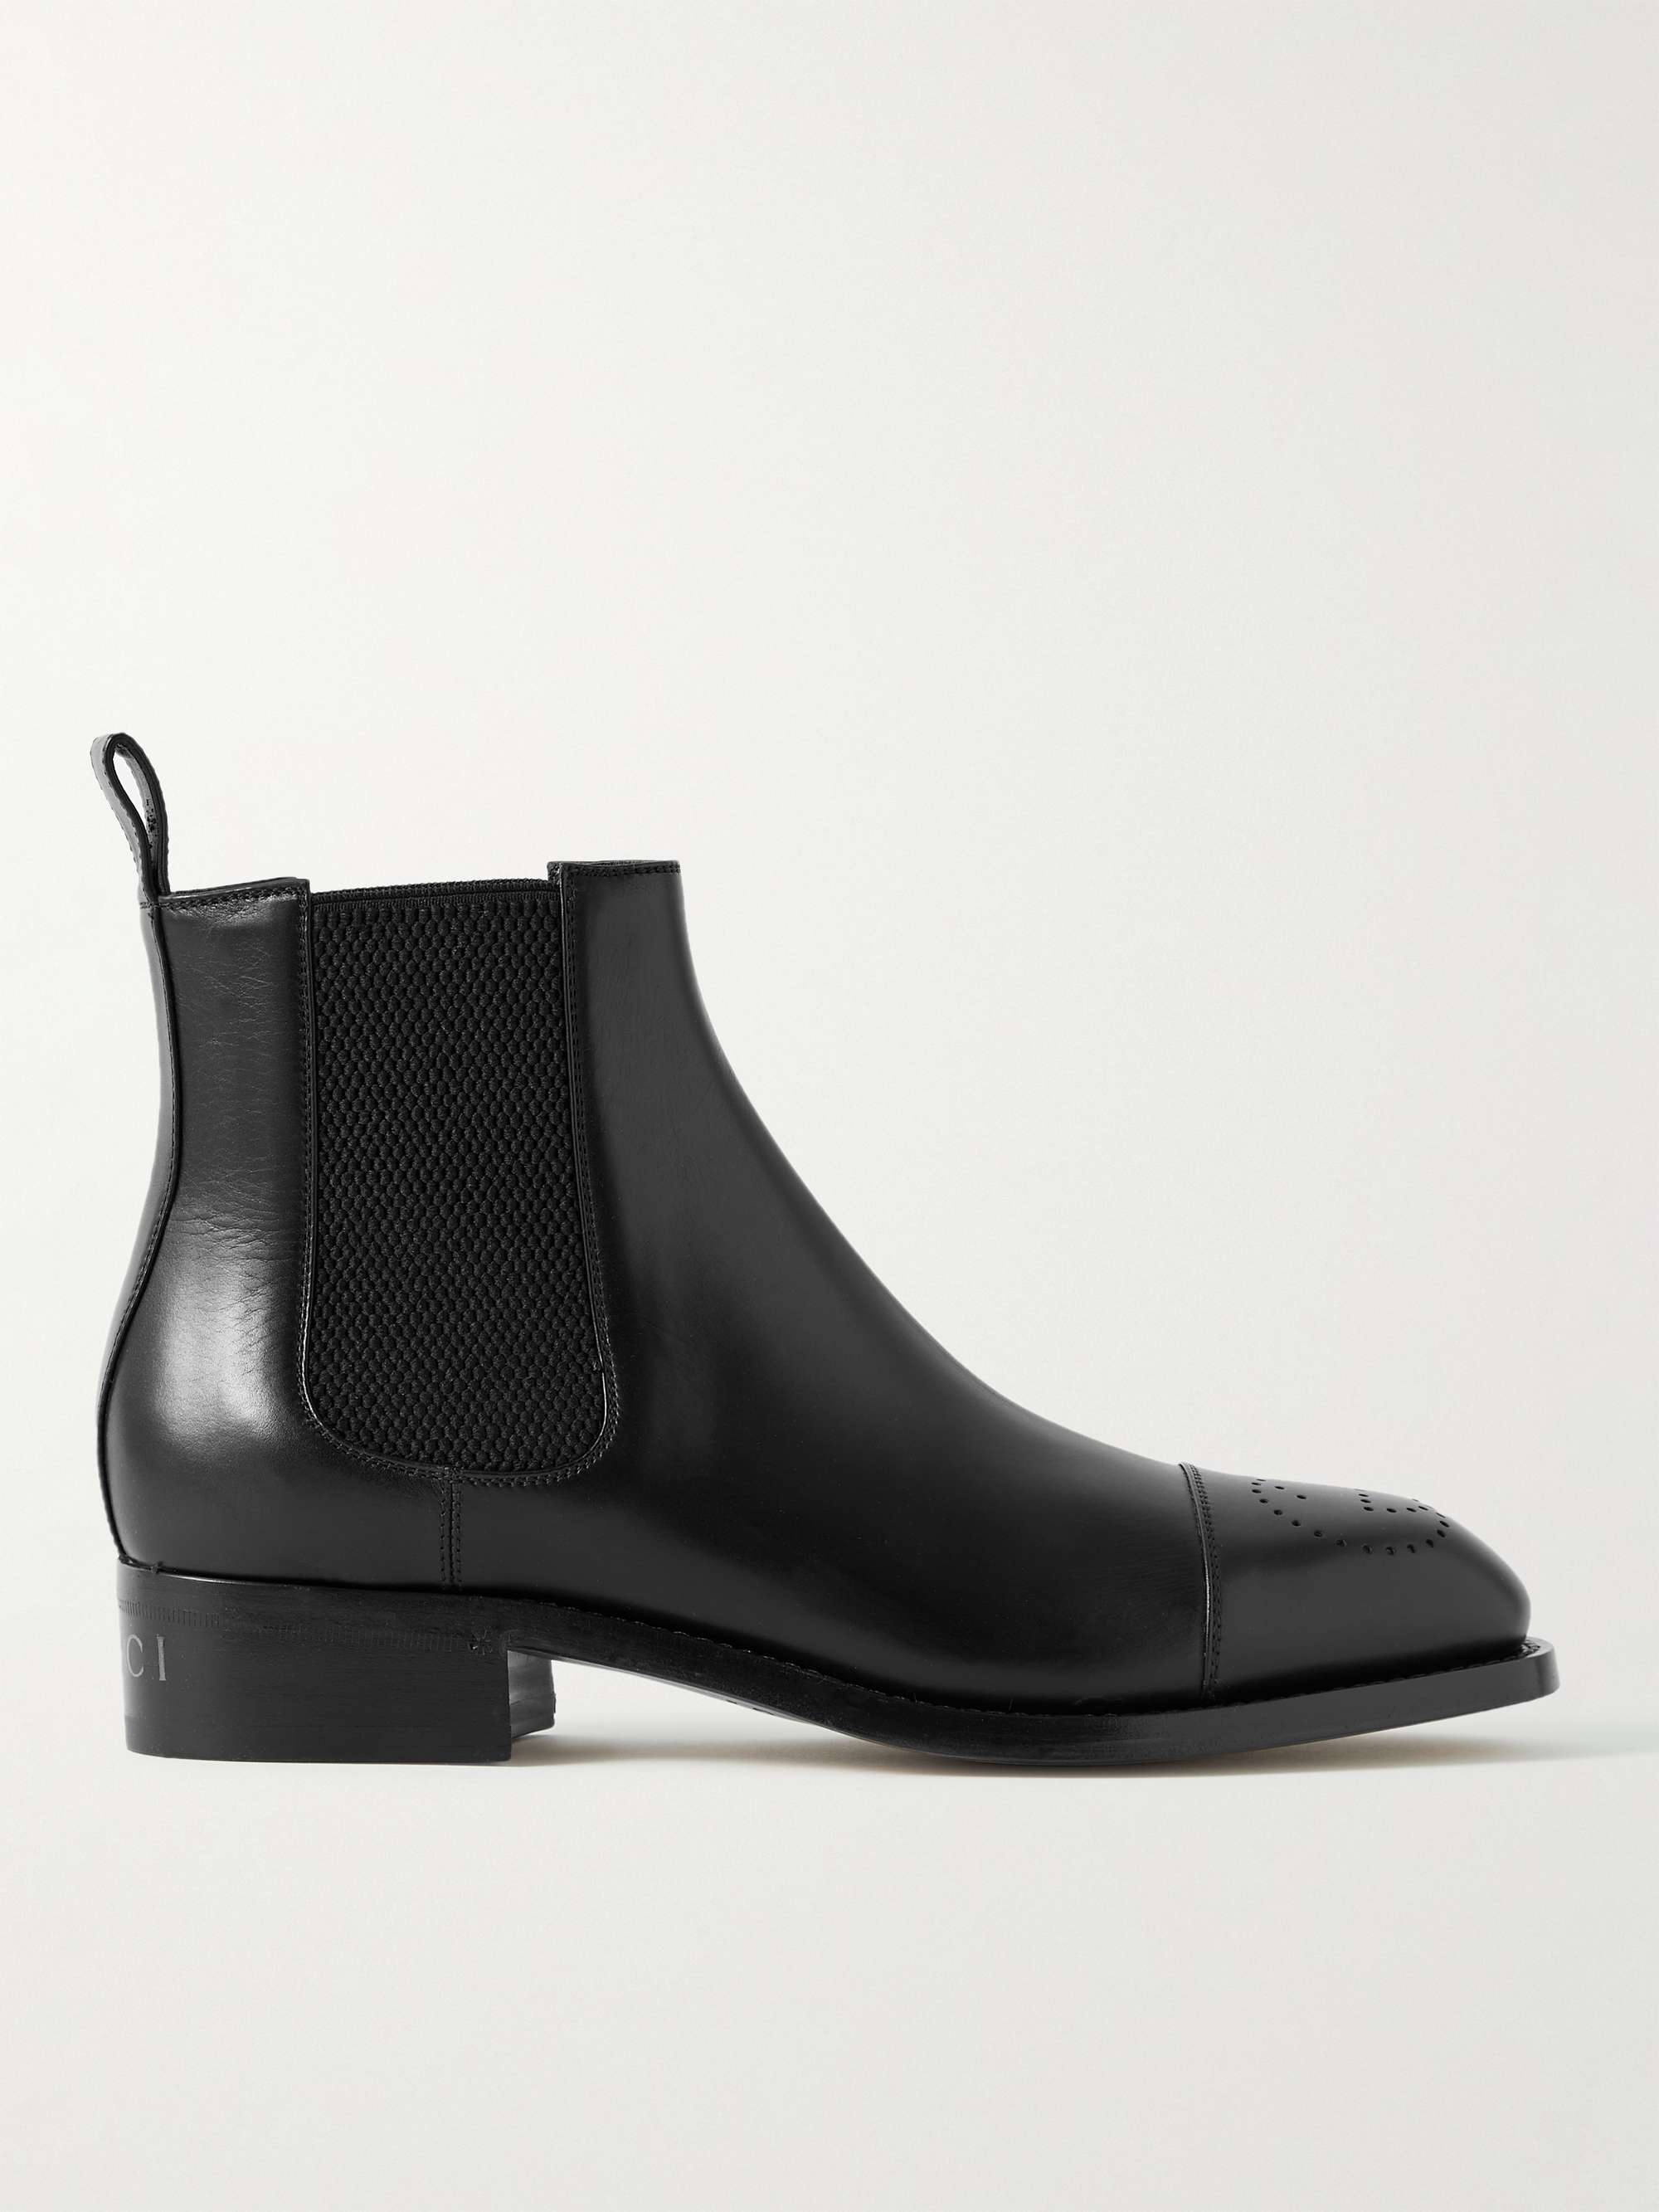 GUCCI Zowie Perforated Leather Chelsea Boots for Men | MR PORTER